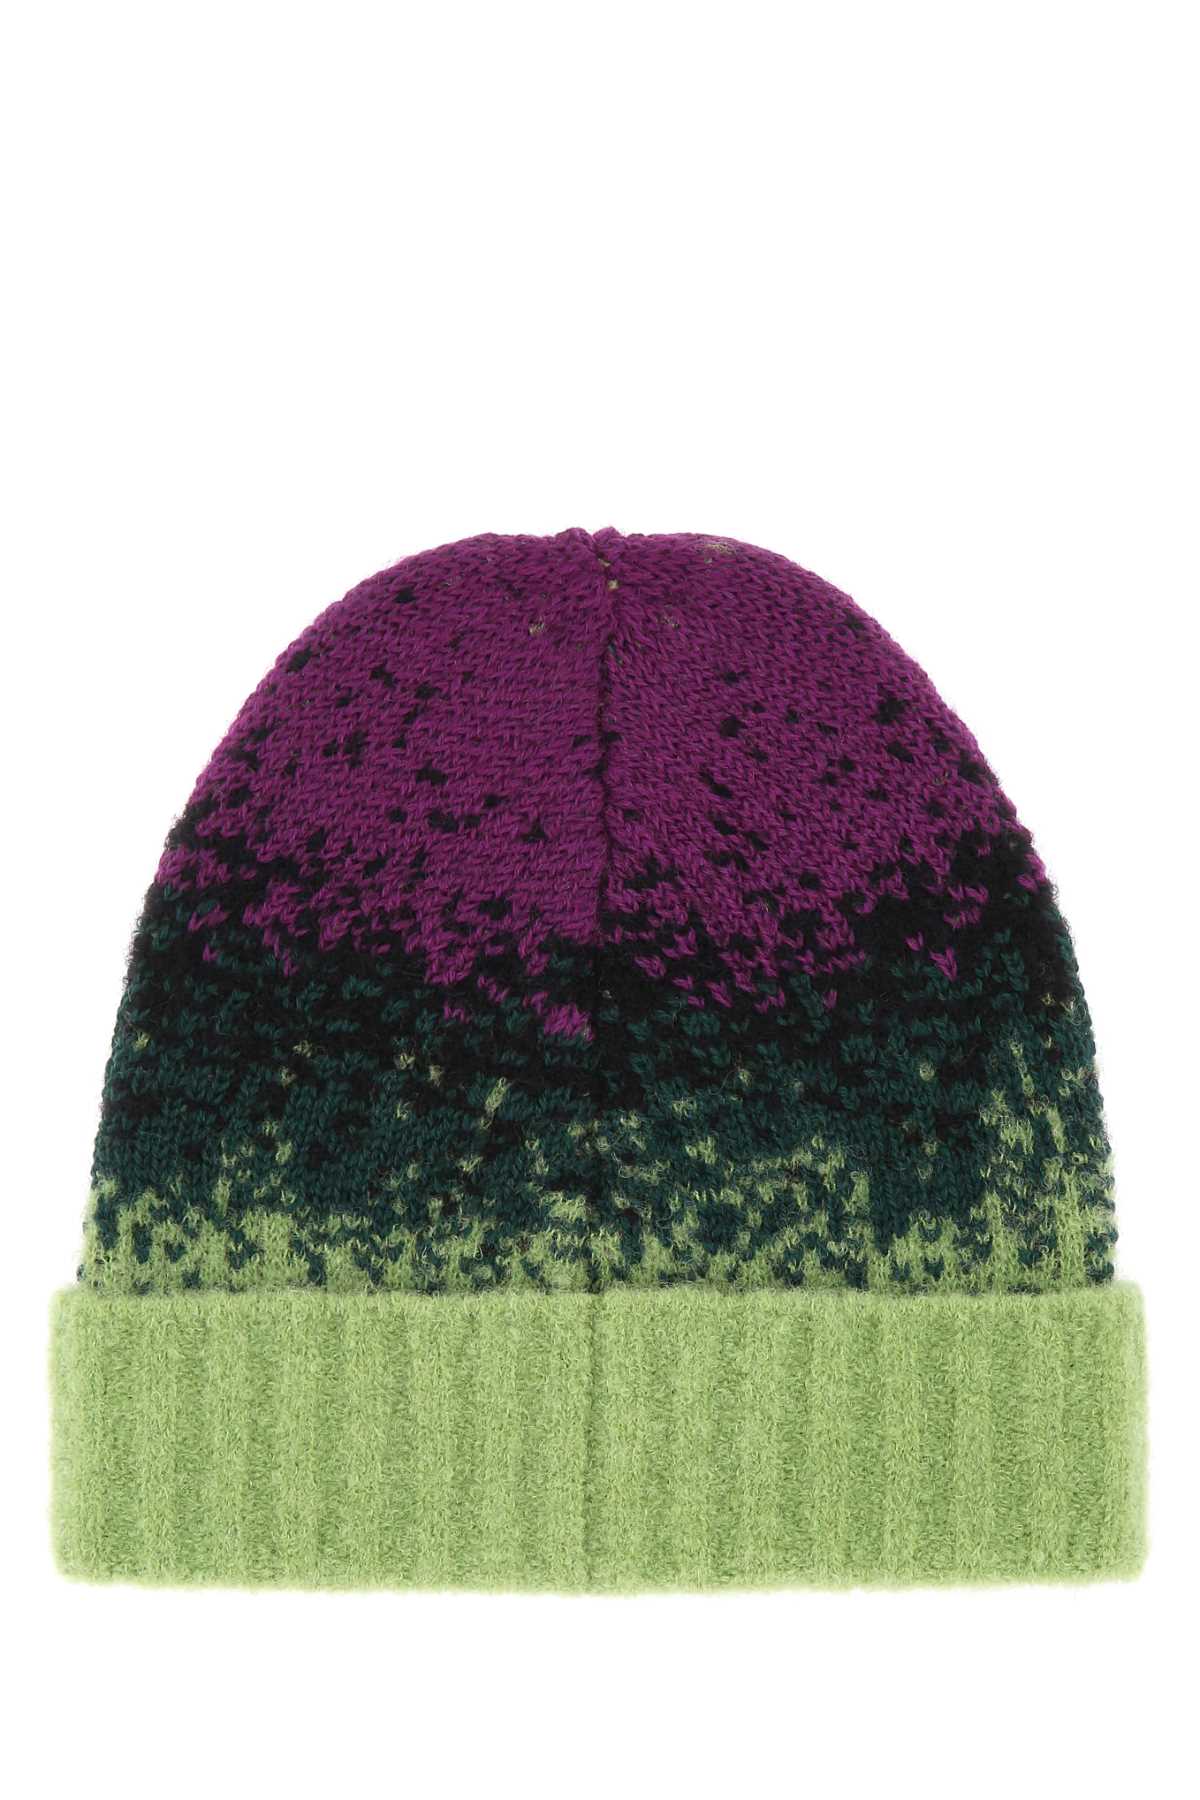 Y/project Multicolor Stretch Wool Blend Beanie Hat In Greyelgre